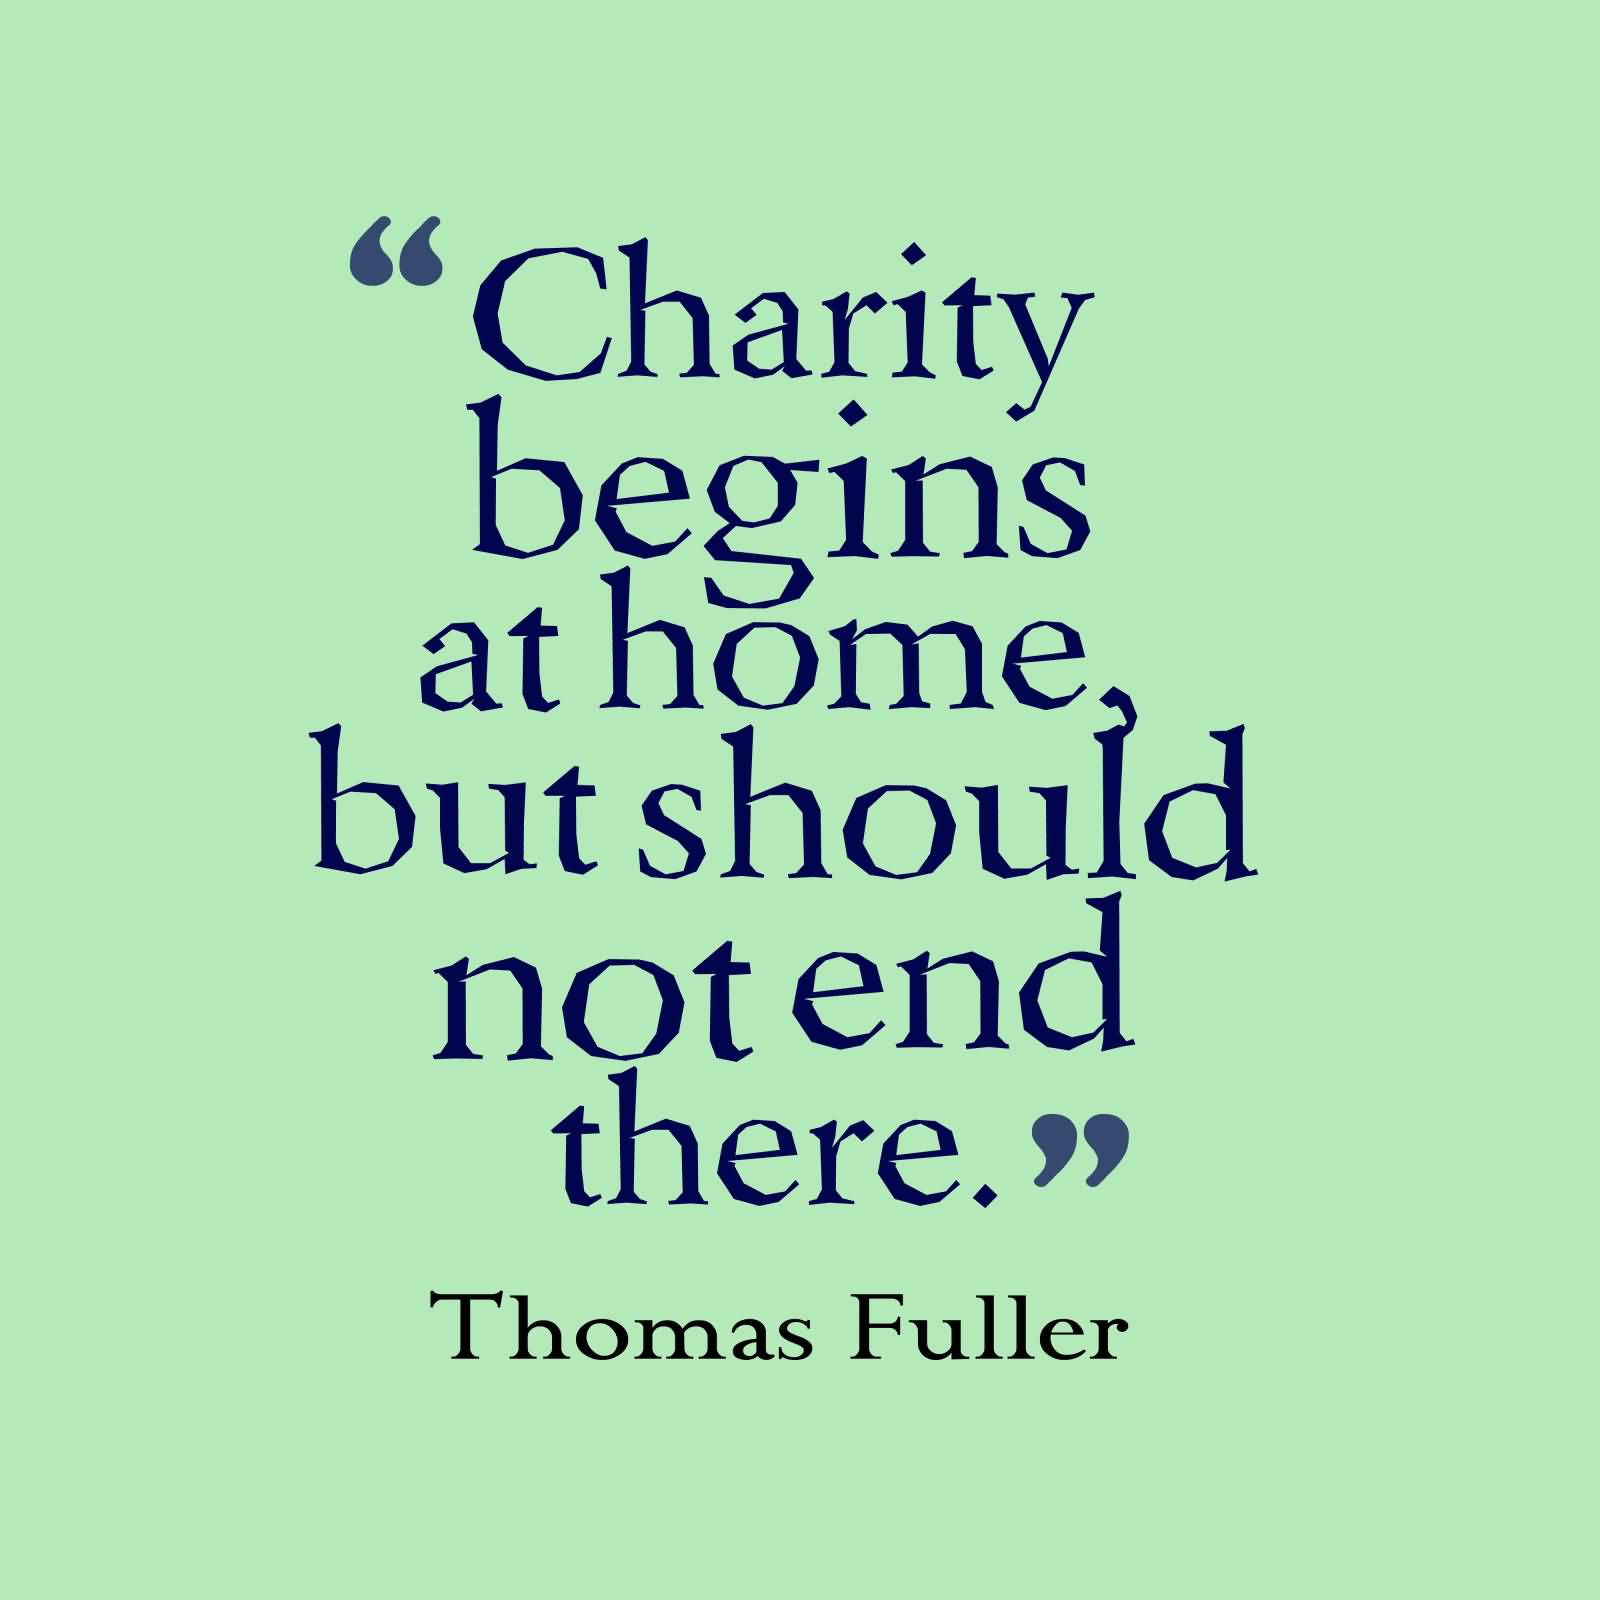 Charity begins at home, but should not end there - Thomas Fuller